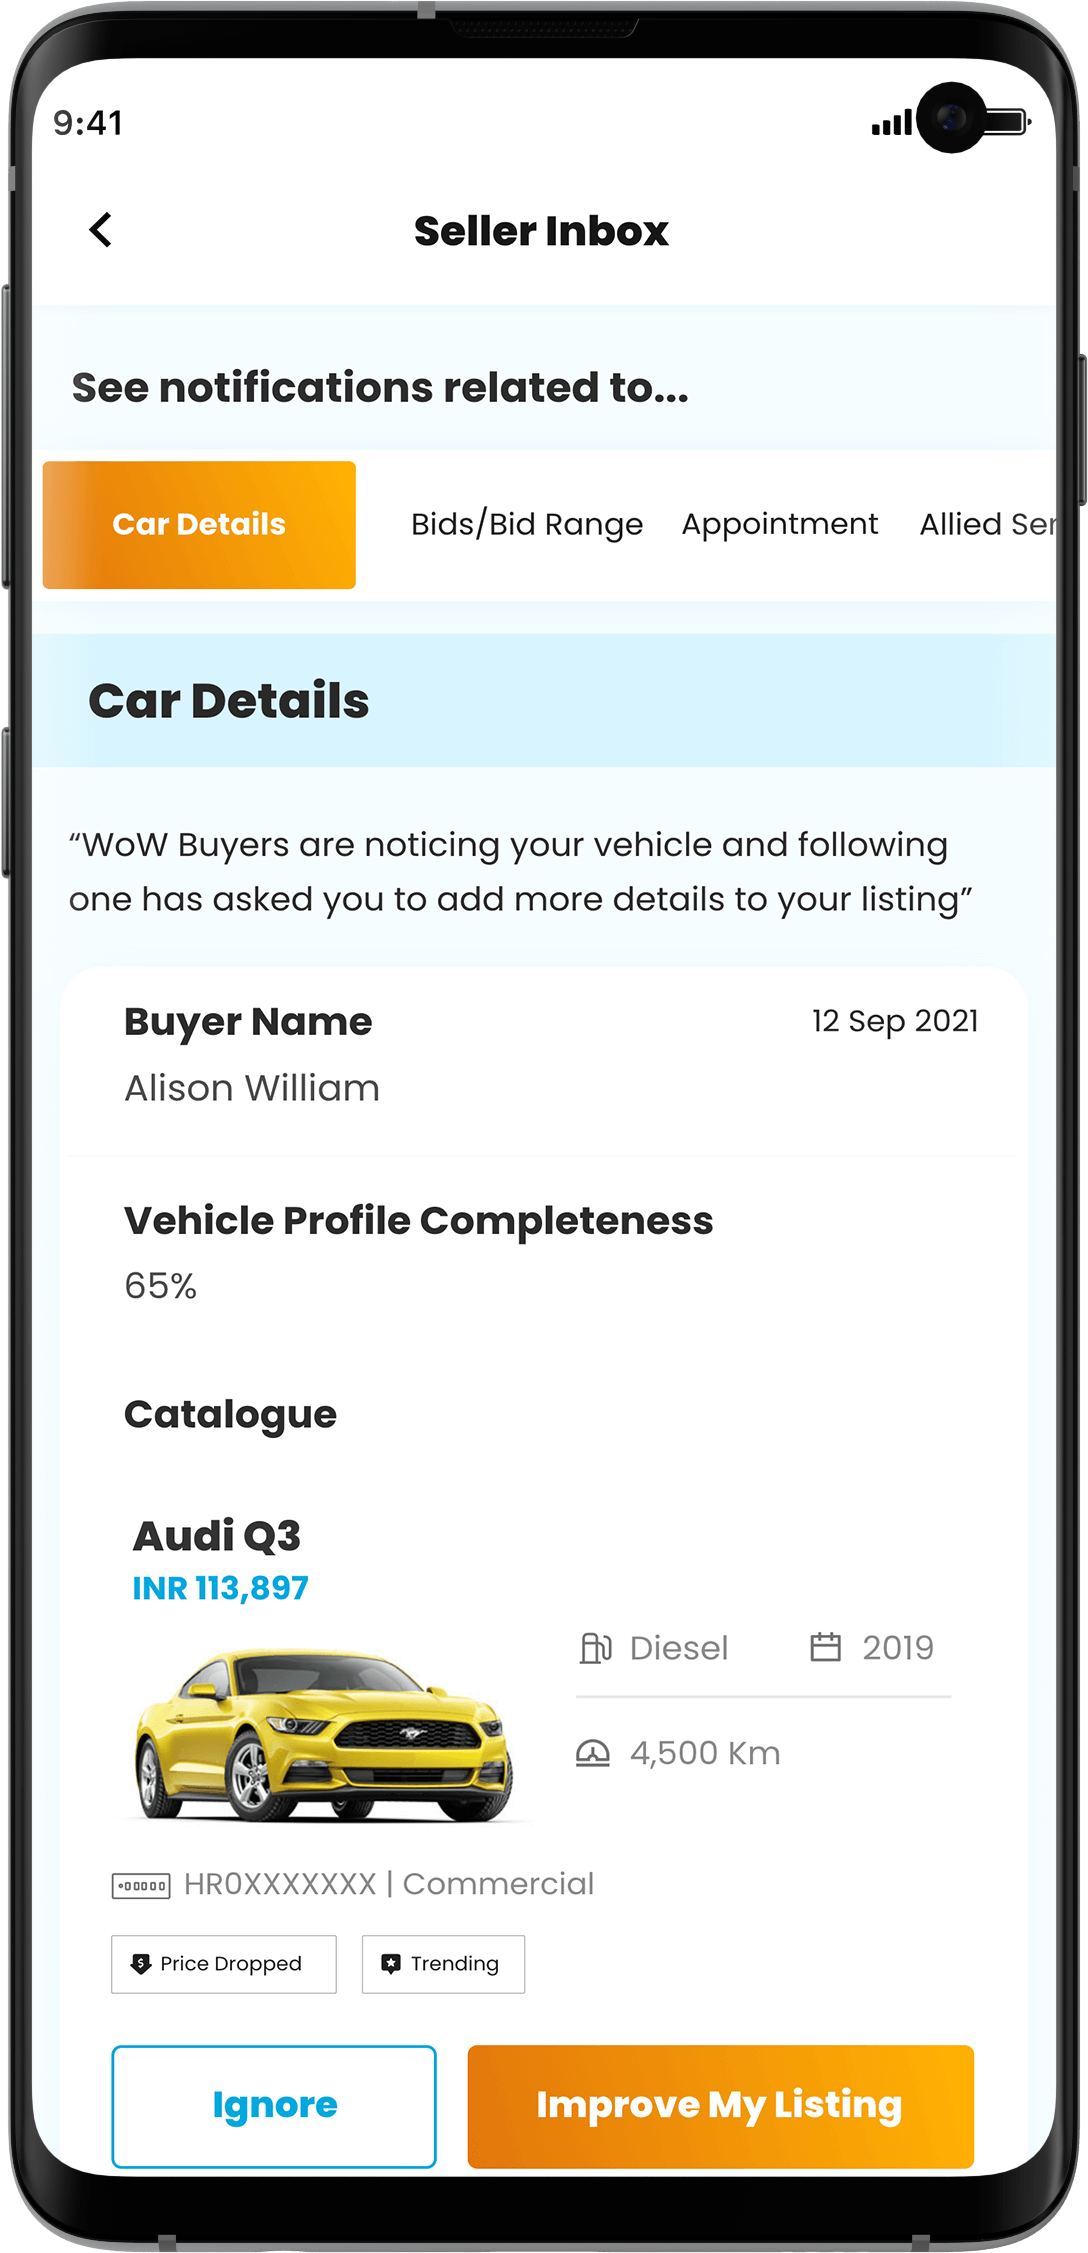 P2P carz has created a platform where buyers and sellers can directly communicate with each other and sell or buy the car at easy with full trust and avoid any third party brokers or dealers